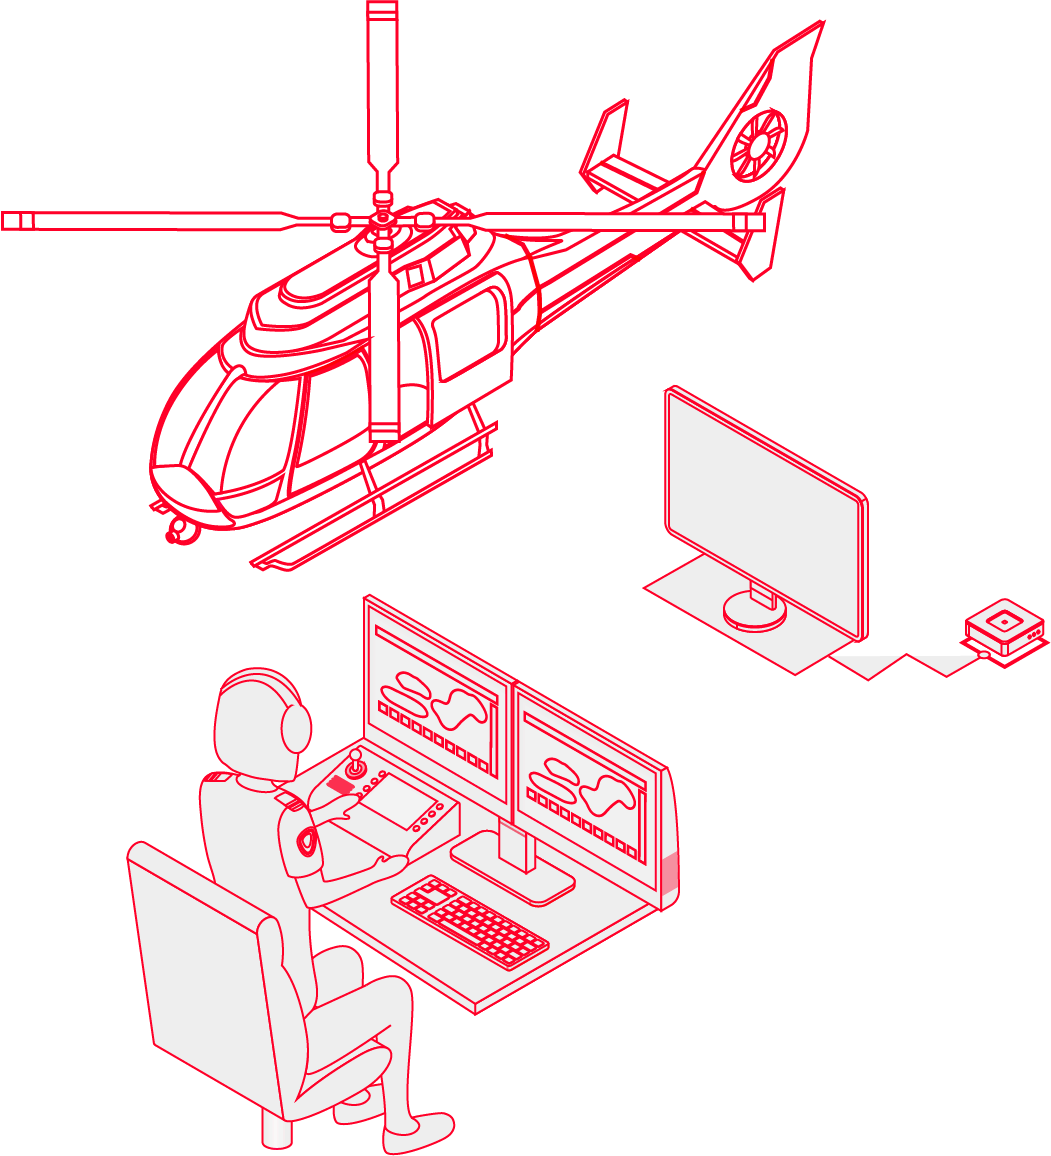 Illustration of a dispatch officer in the command and control centre monitoring airborne assets